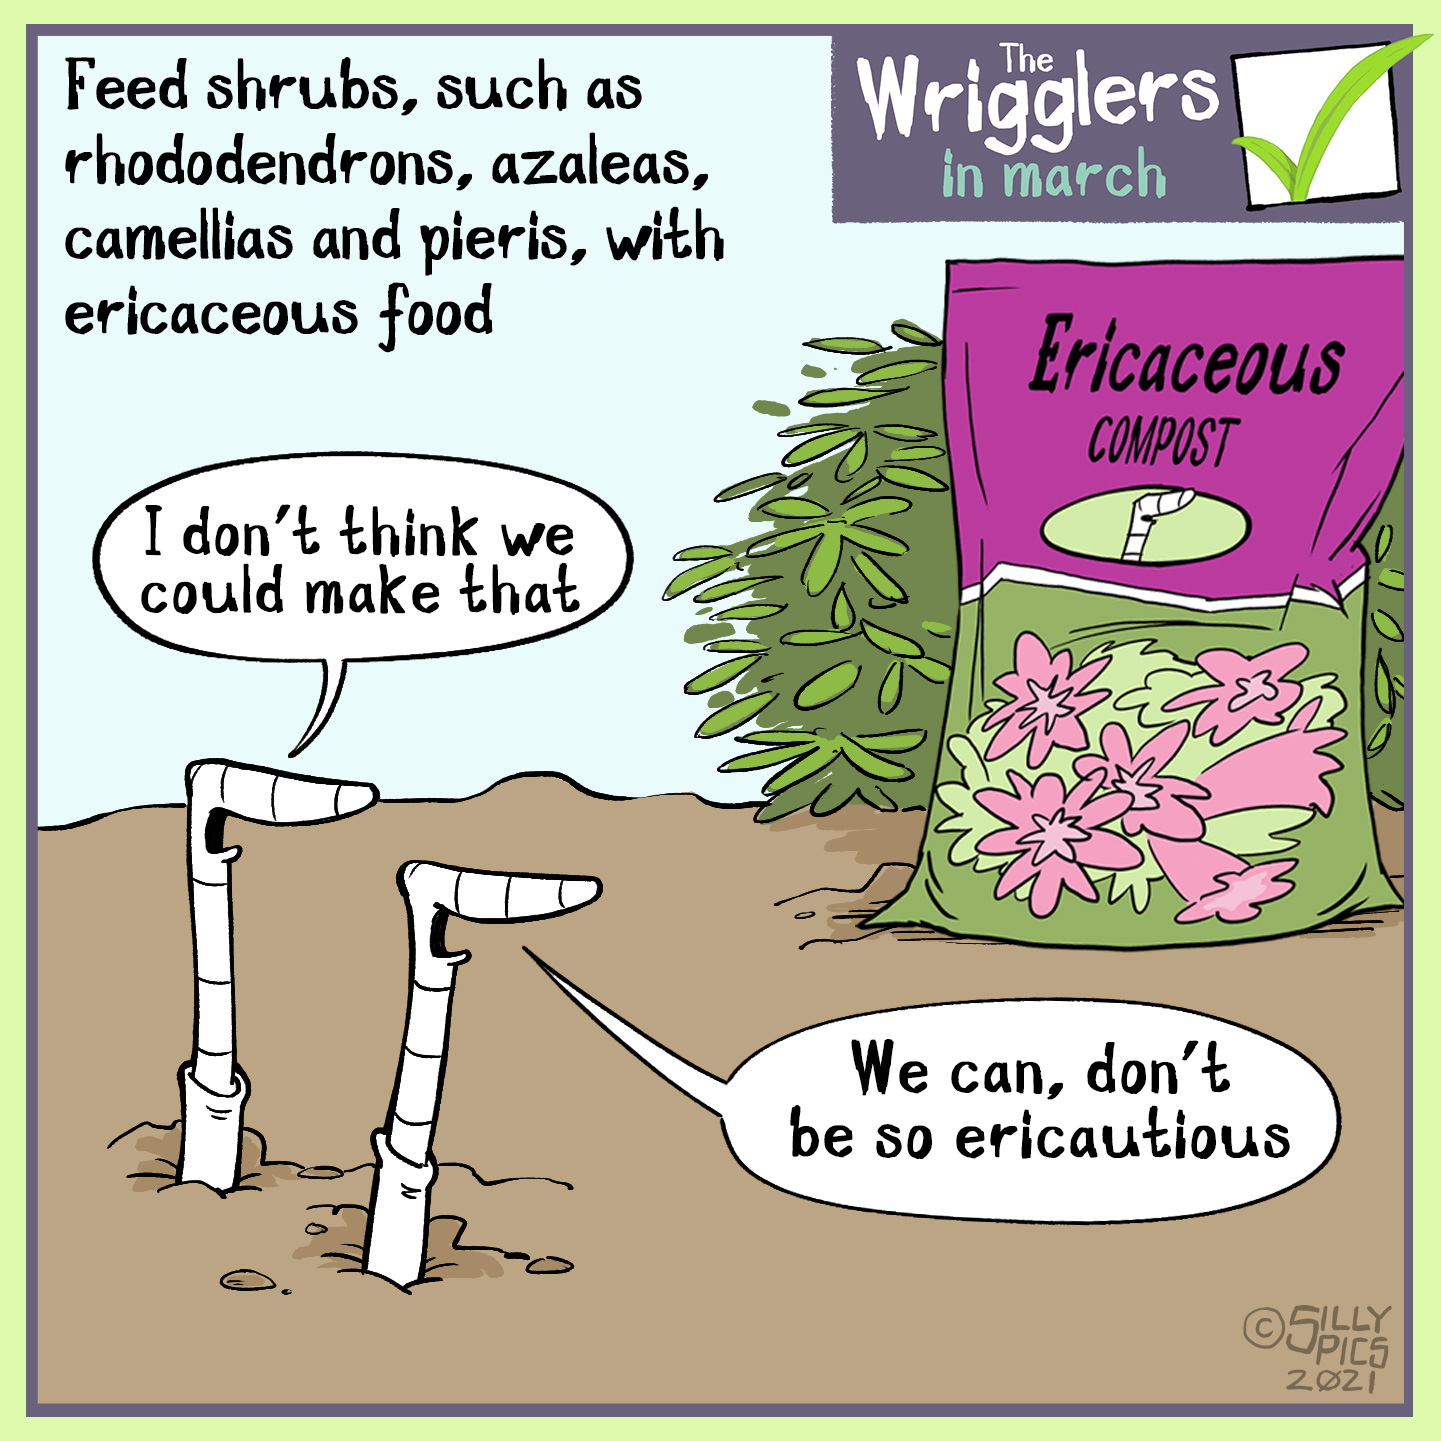 Some plants like an ericaceous compost. In this cartoon two worms are looking at a bag of ericaceous compost, one says, 'Can we make that?" The other work says,we can, don't be so ericautious